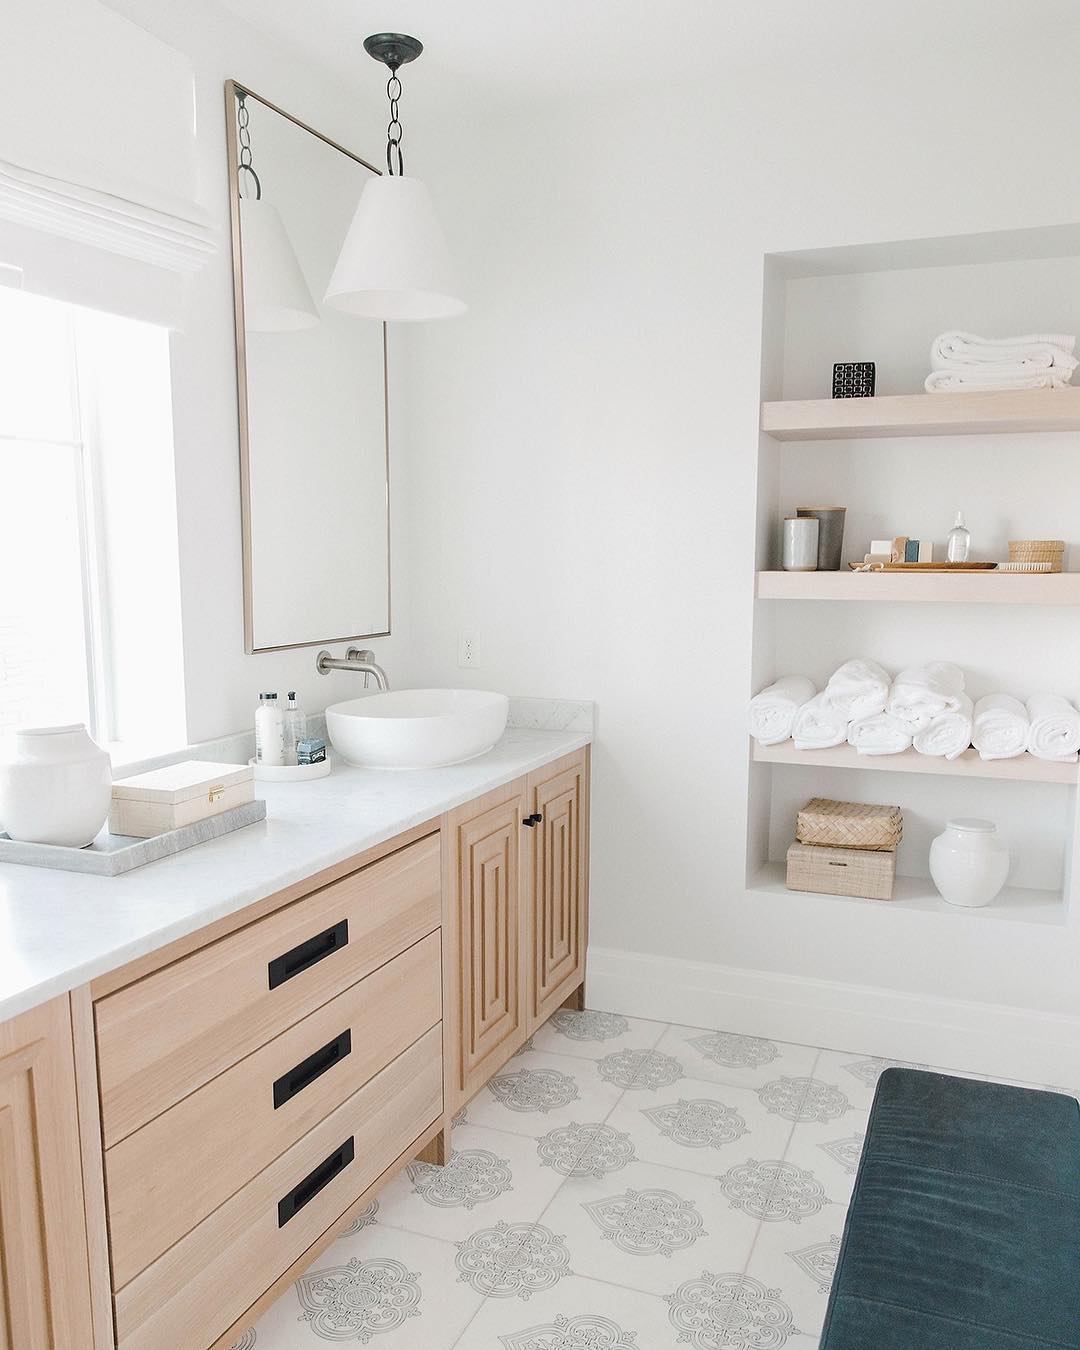 All-white bathroom with blue rug and wood vanity. Photo by Instagram user @kristinabills